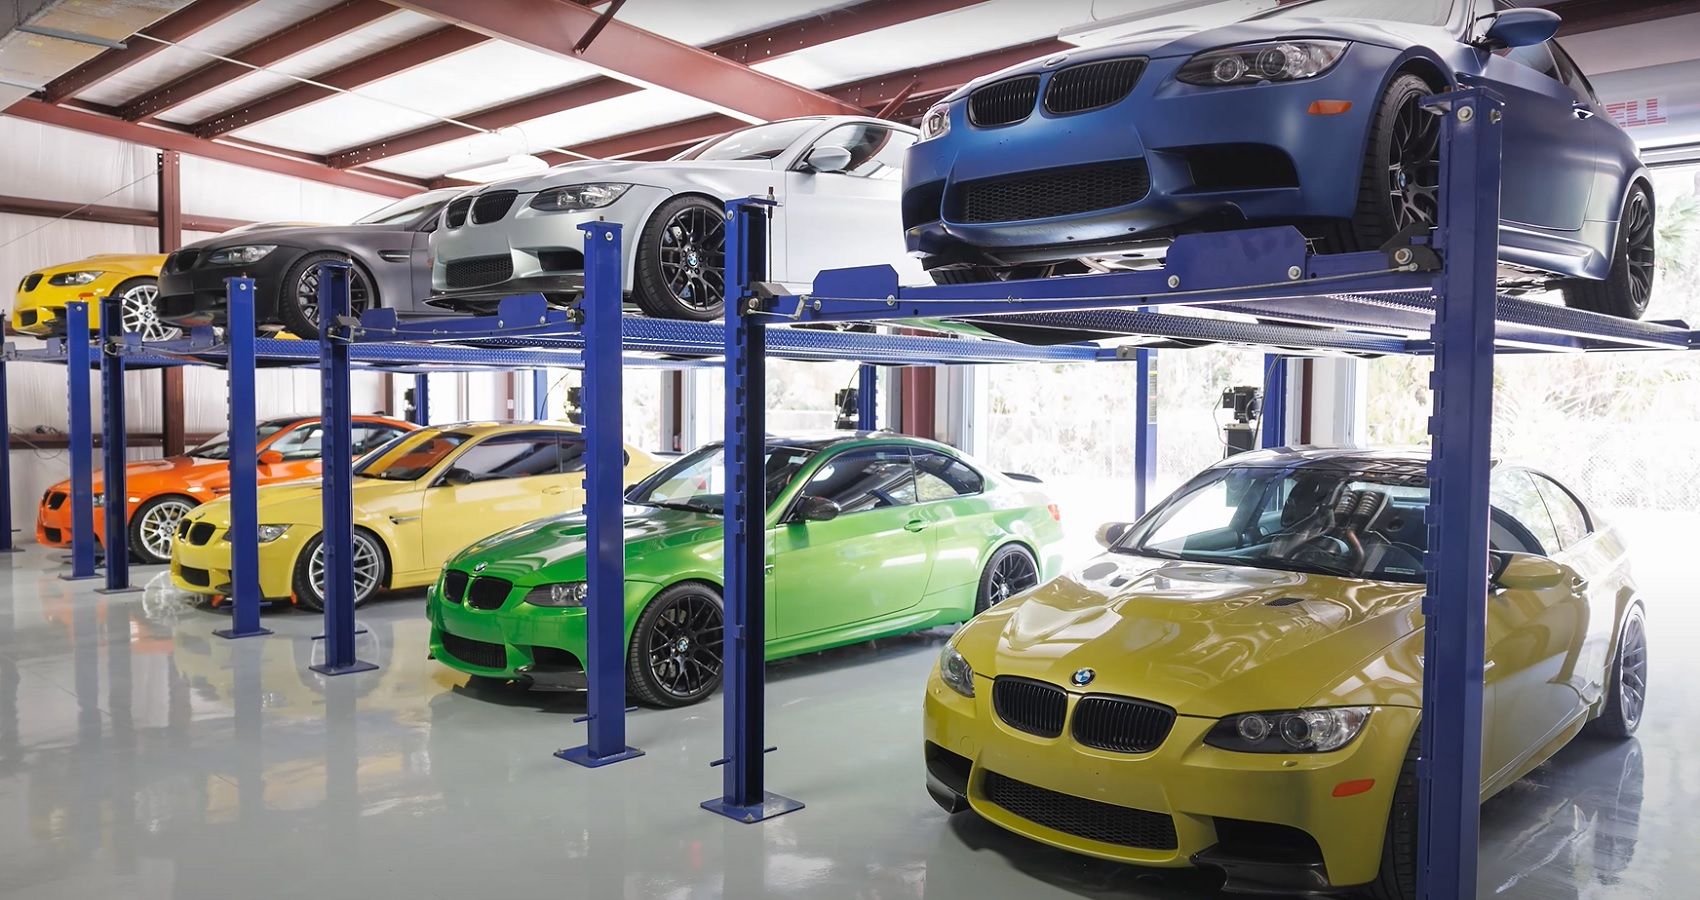 E92 BMW M3 Coupe Collection in a variety of colors